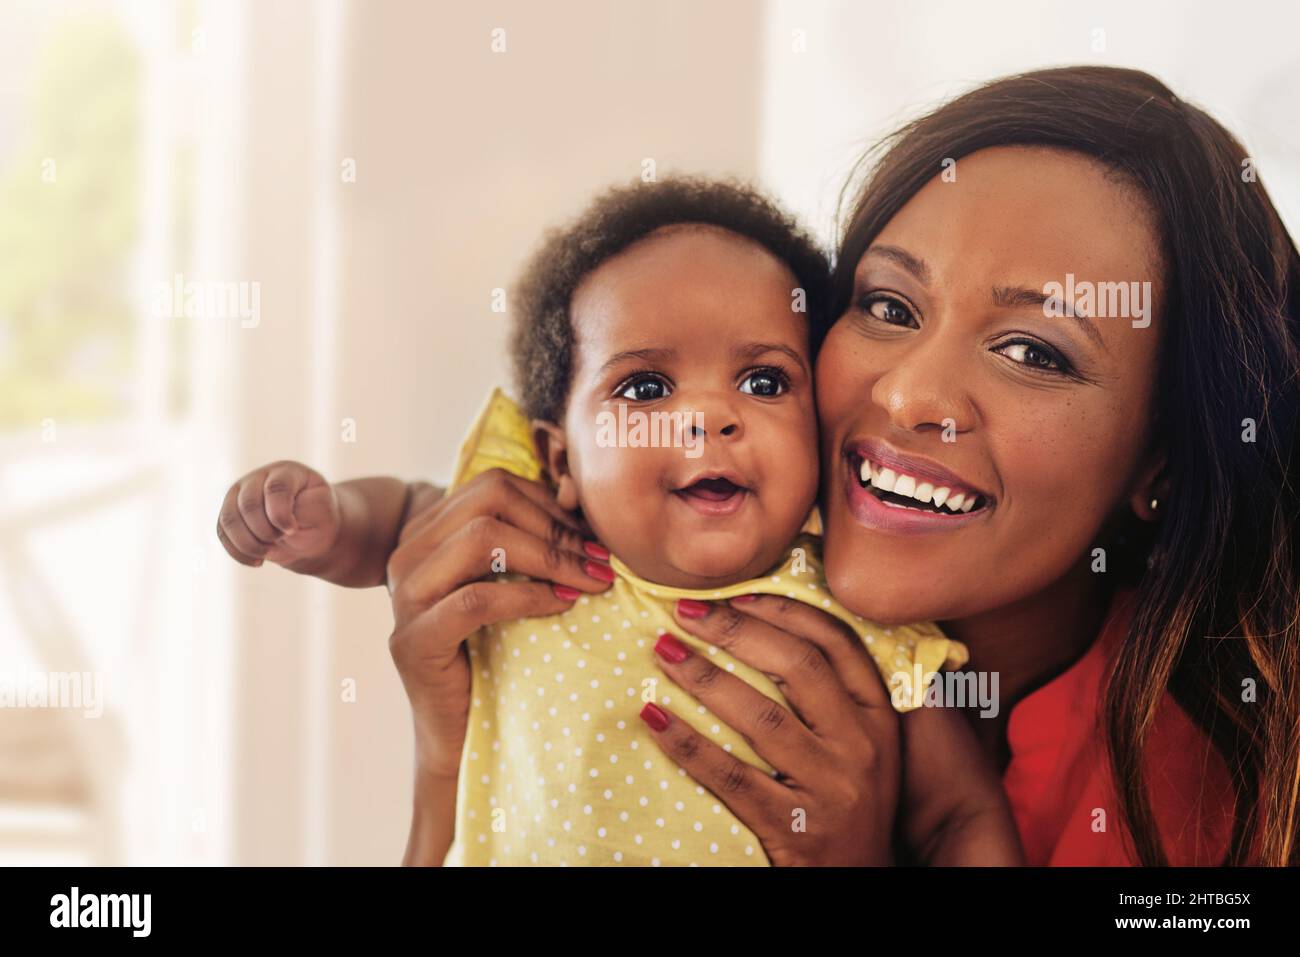 Can you see where she got her good looks from. Portrait of a mother holding up her baby girl. Stock Photo